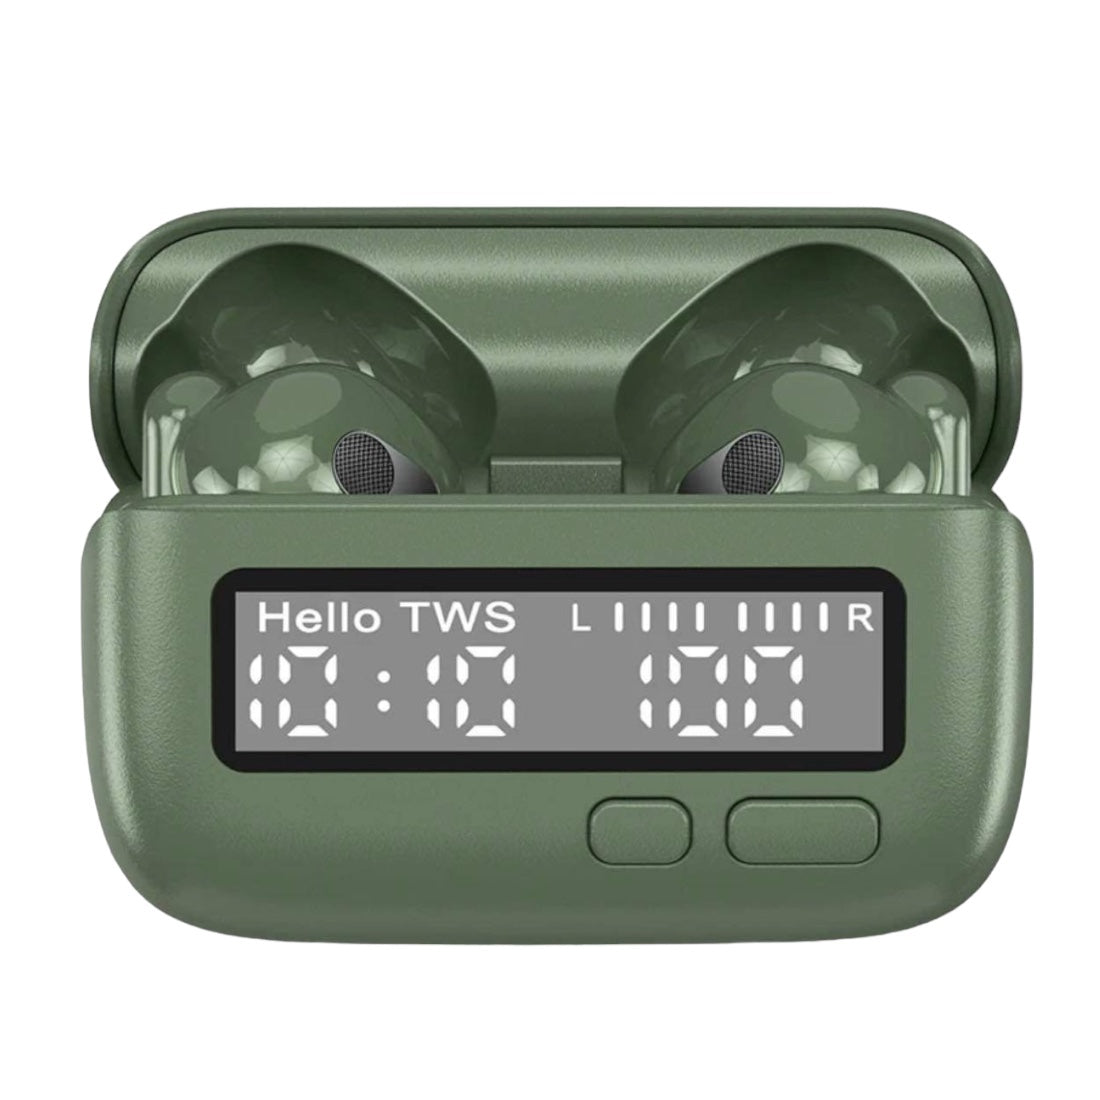 Rotero Portable style True Wireless Earbuds